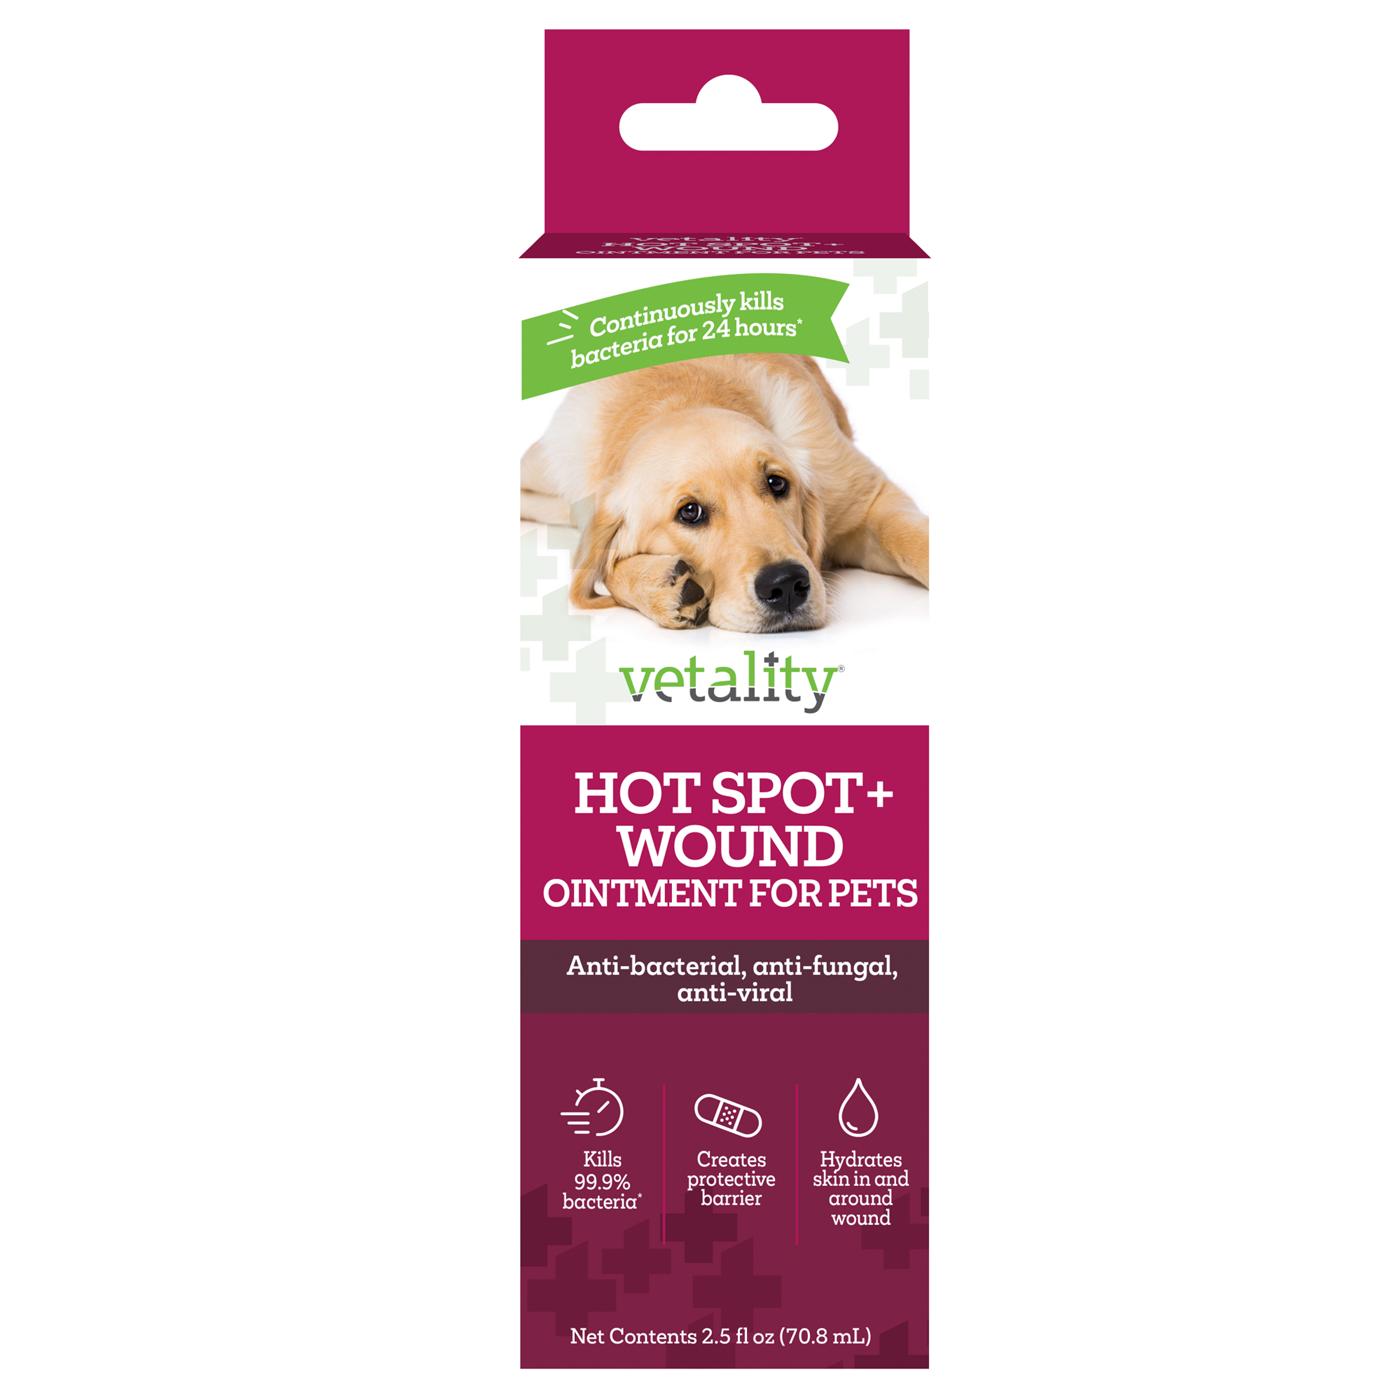 Vetality Hot Spot & Wound Ointment for Pets; image 1 of 2